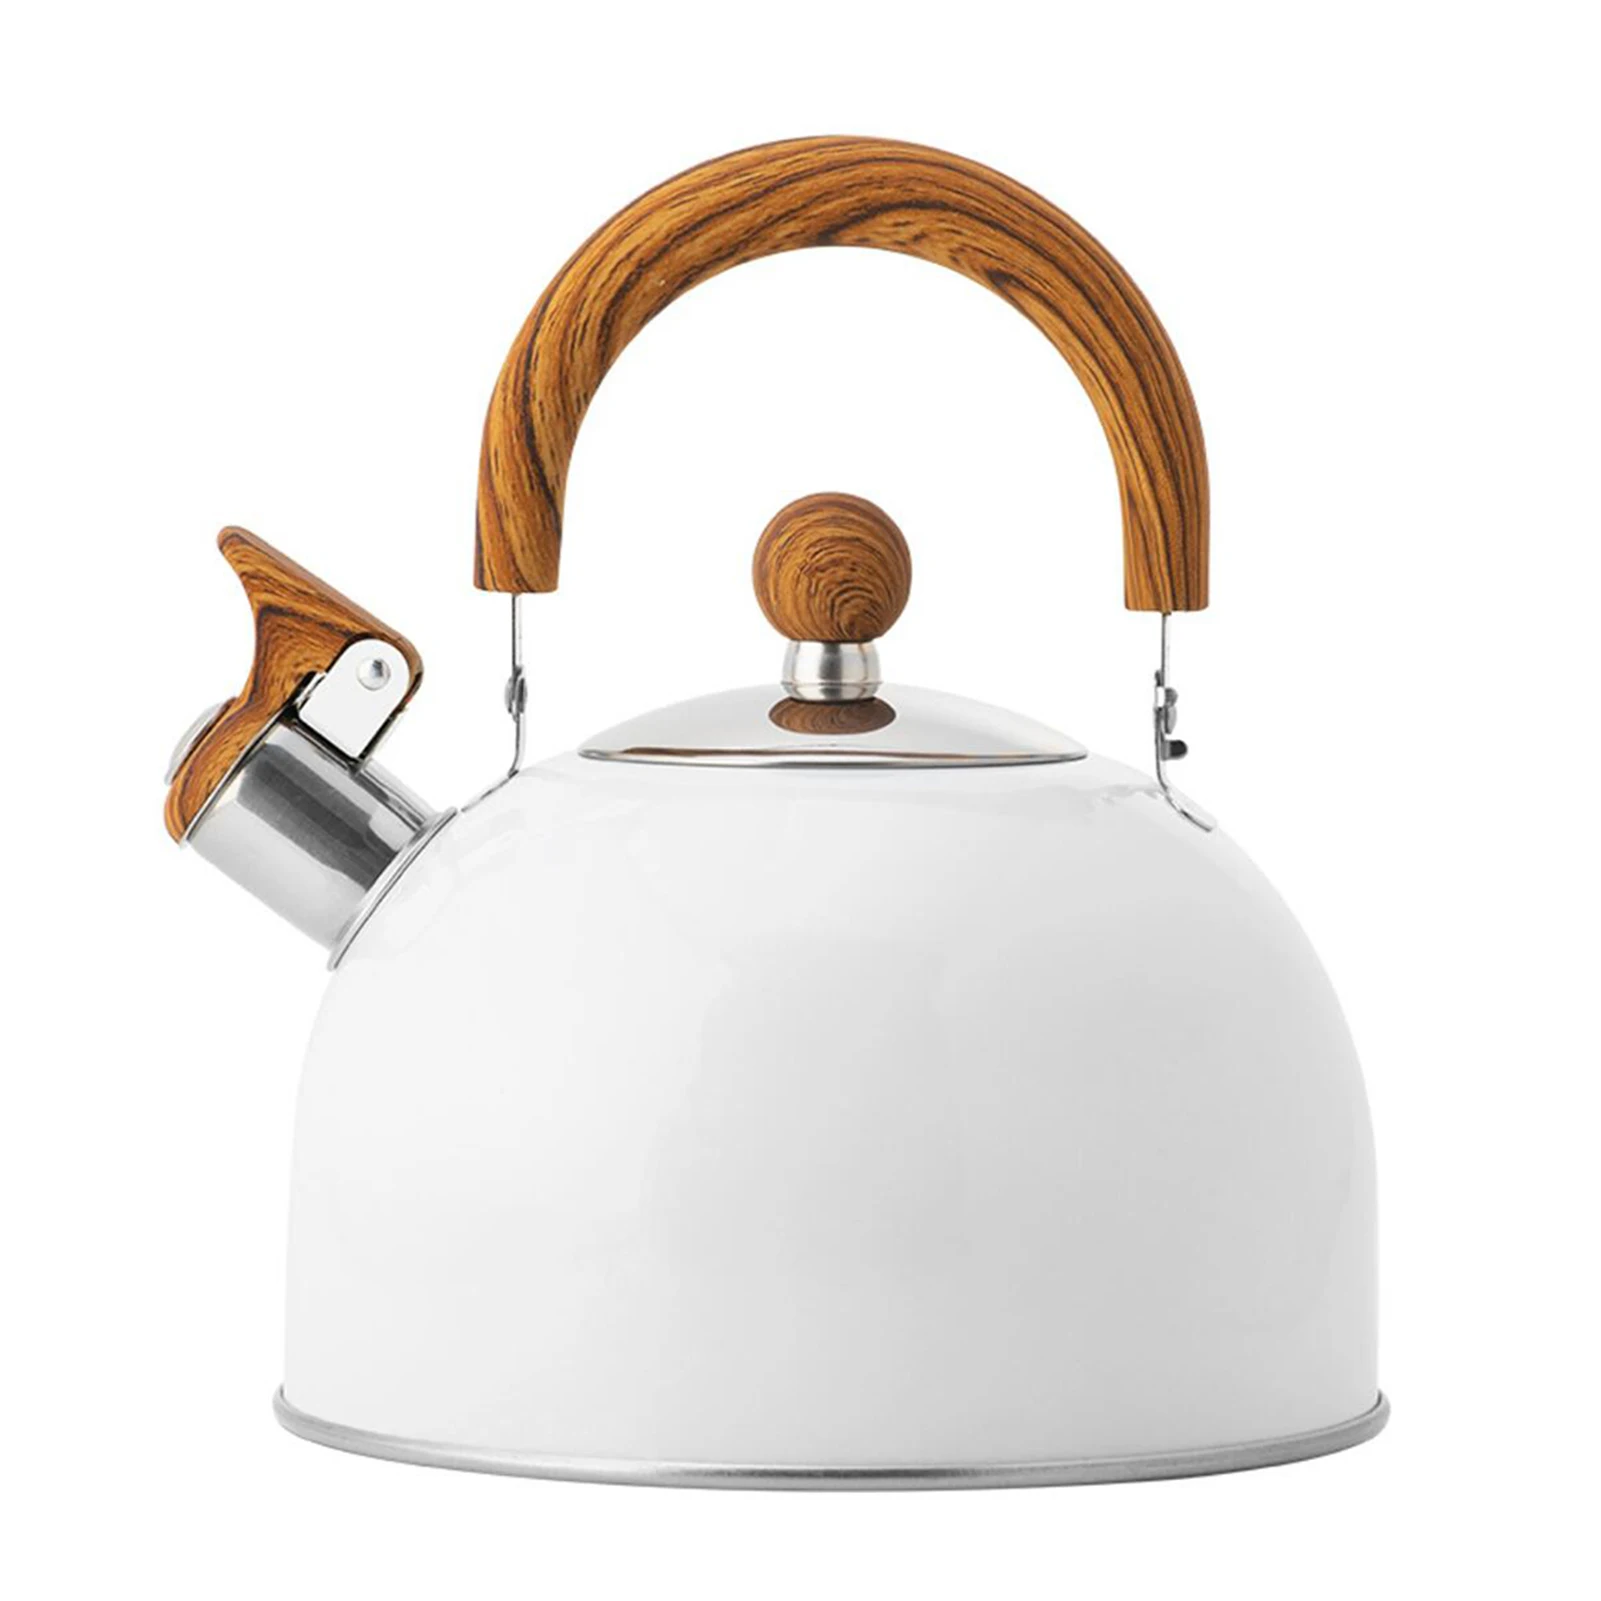 

Stovetop Tea Kettle 2.5L White Whistling Teapot Stainless Steel Teapot With Wooden Grain Anti-Scalding Handle Universal For All